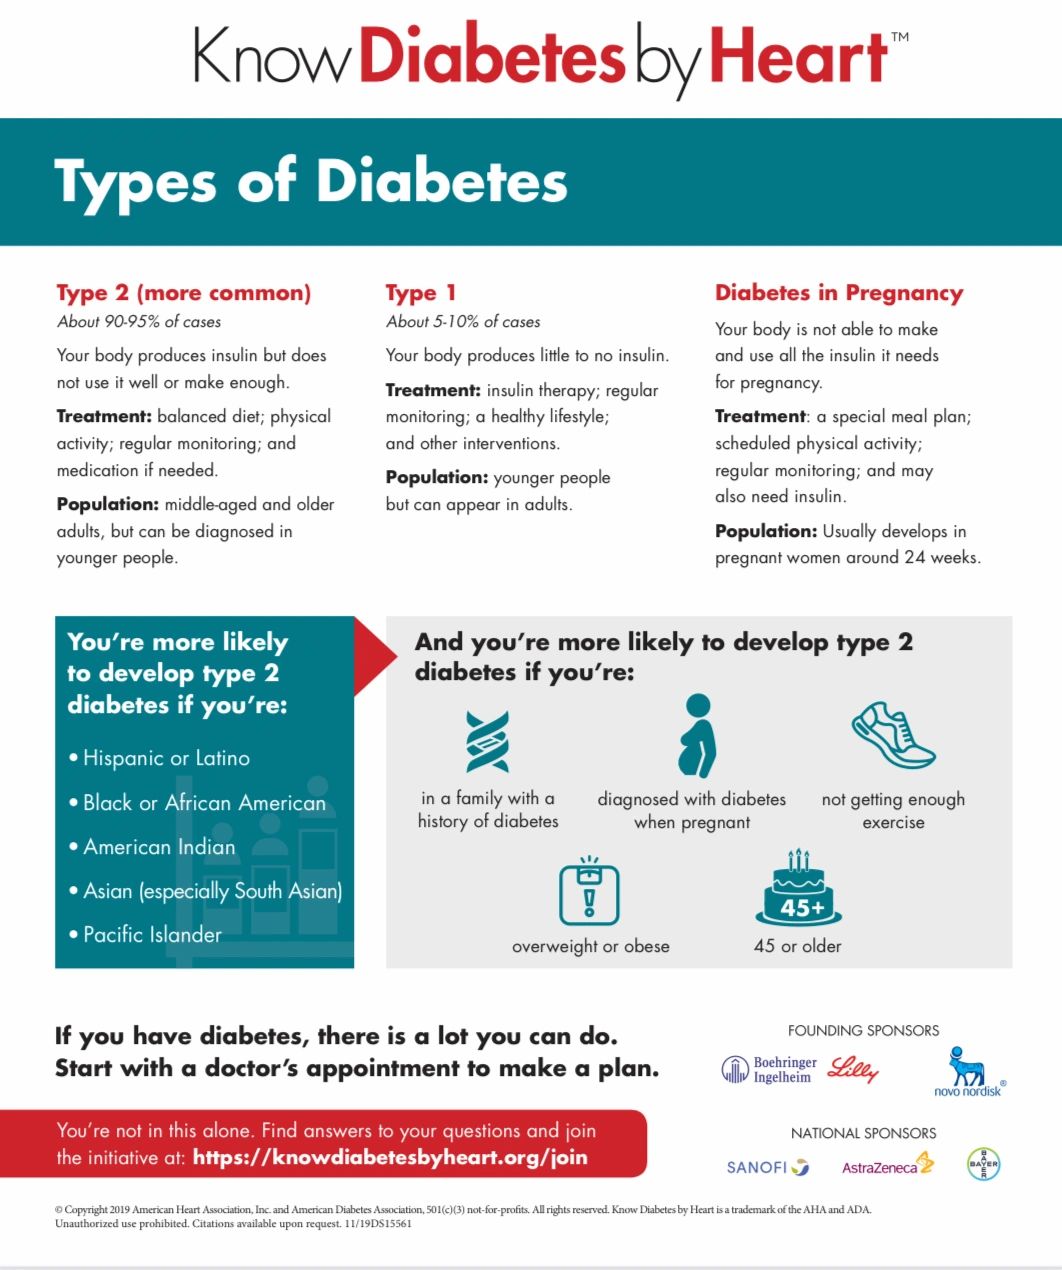 Did you know that there are different types of diabetes?